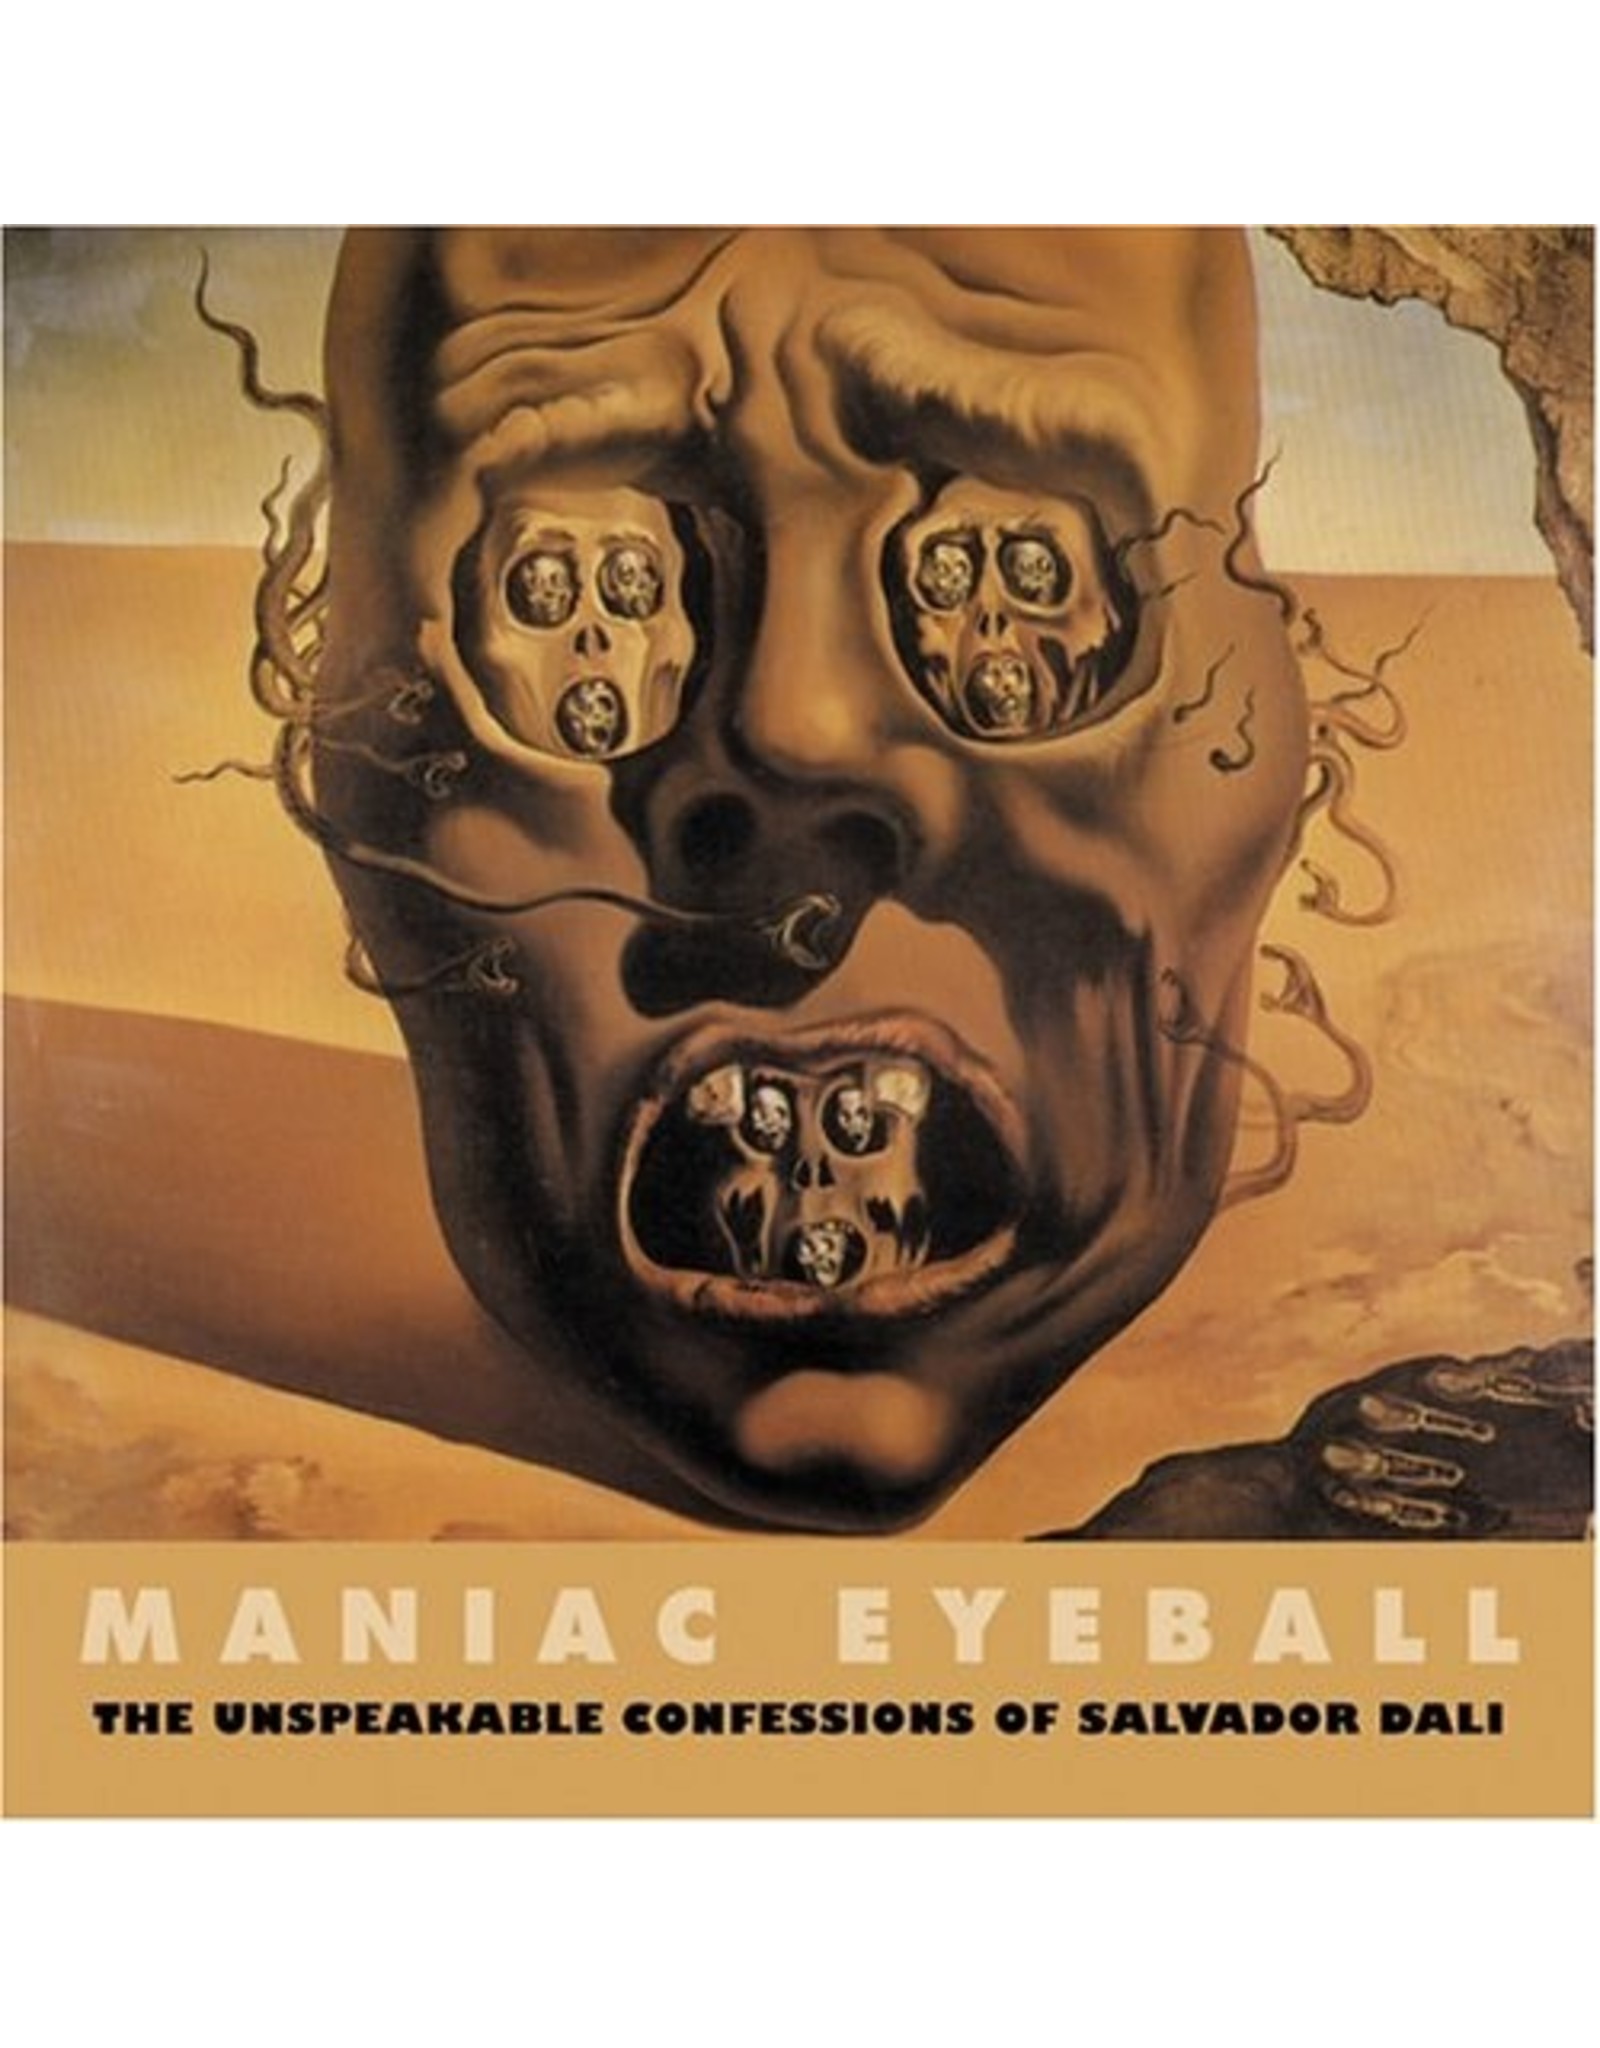 Literature Maniac Eyeball: The Unspeakable Confessions of Salvador Dali